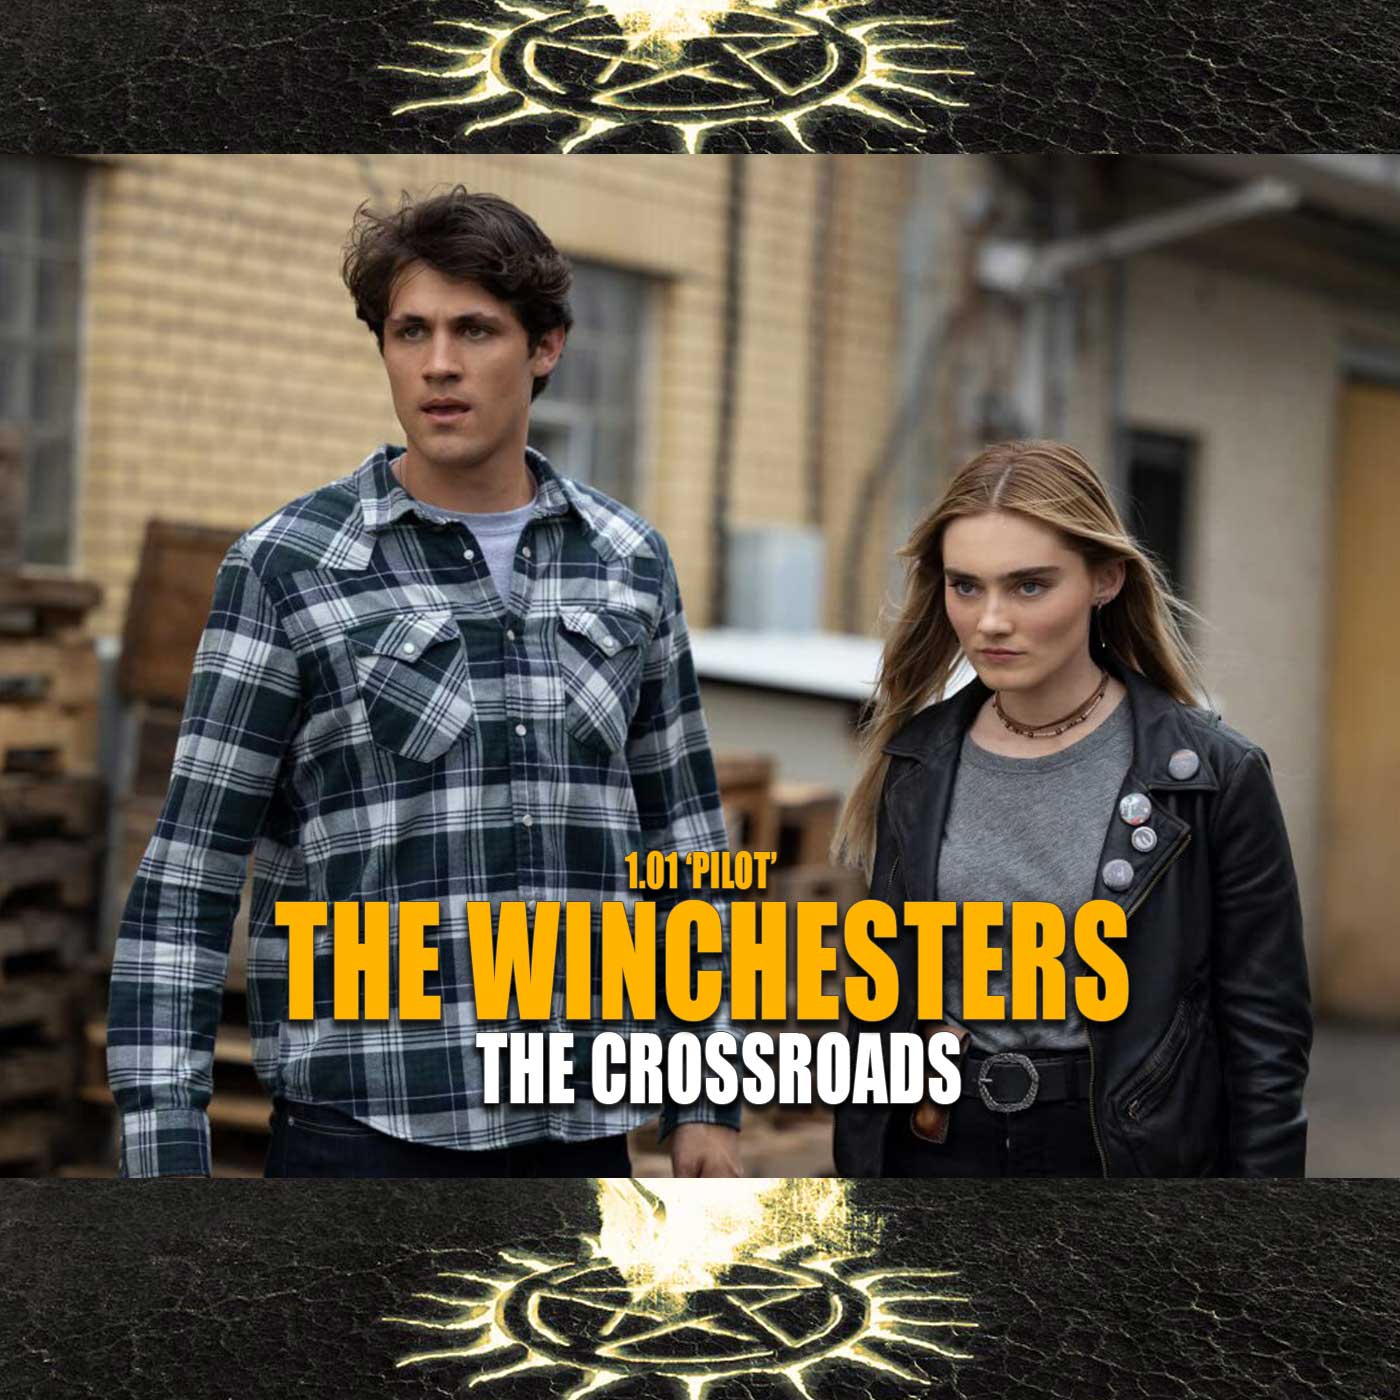 The Winchesters – 1.01 ‘Pilot’